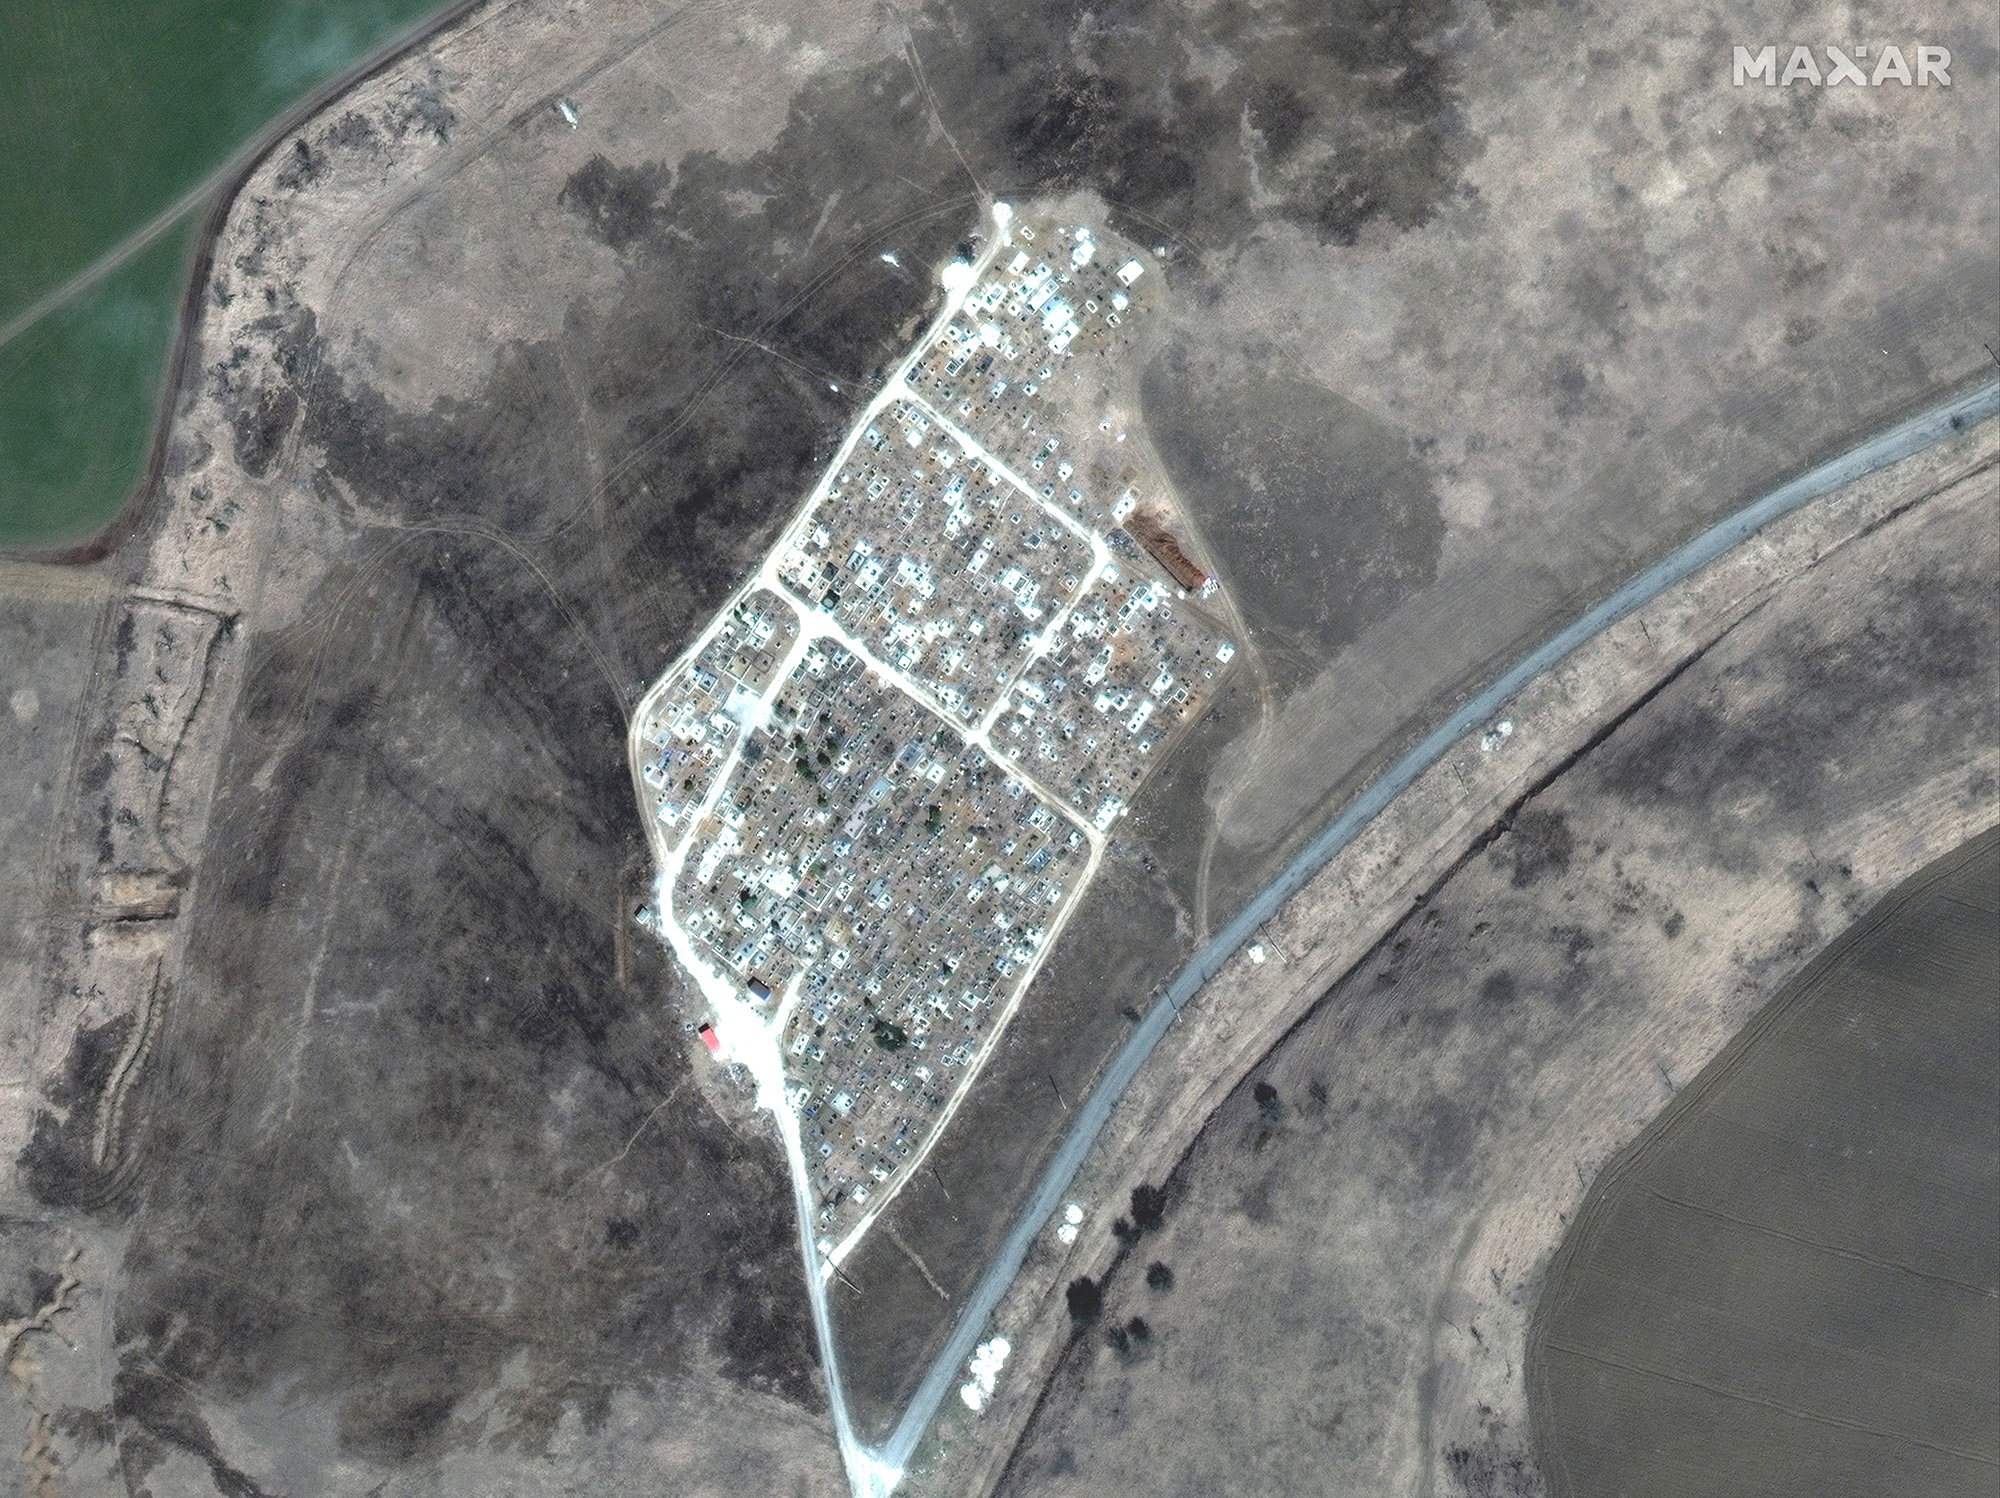 A satellite image shows the expansion of new graves in a cemetery in Vynohradne, near Mariupol, Ukraine, on March 29.